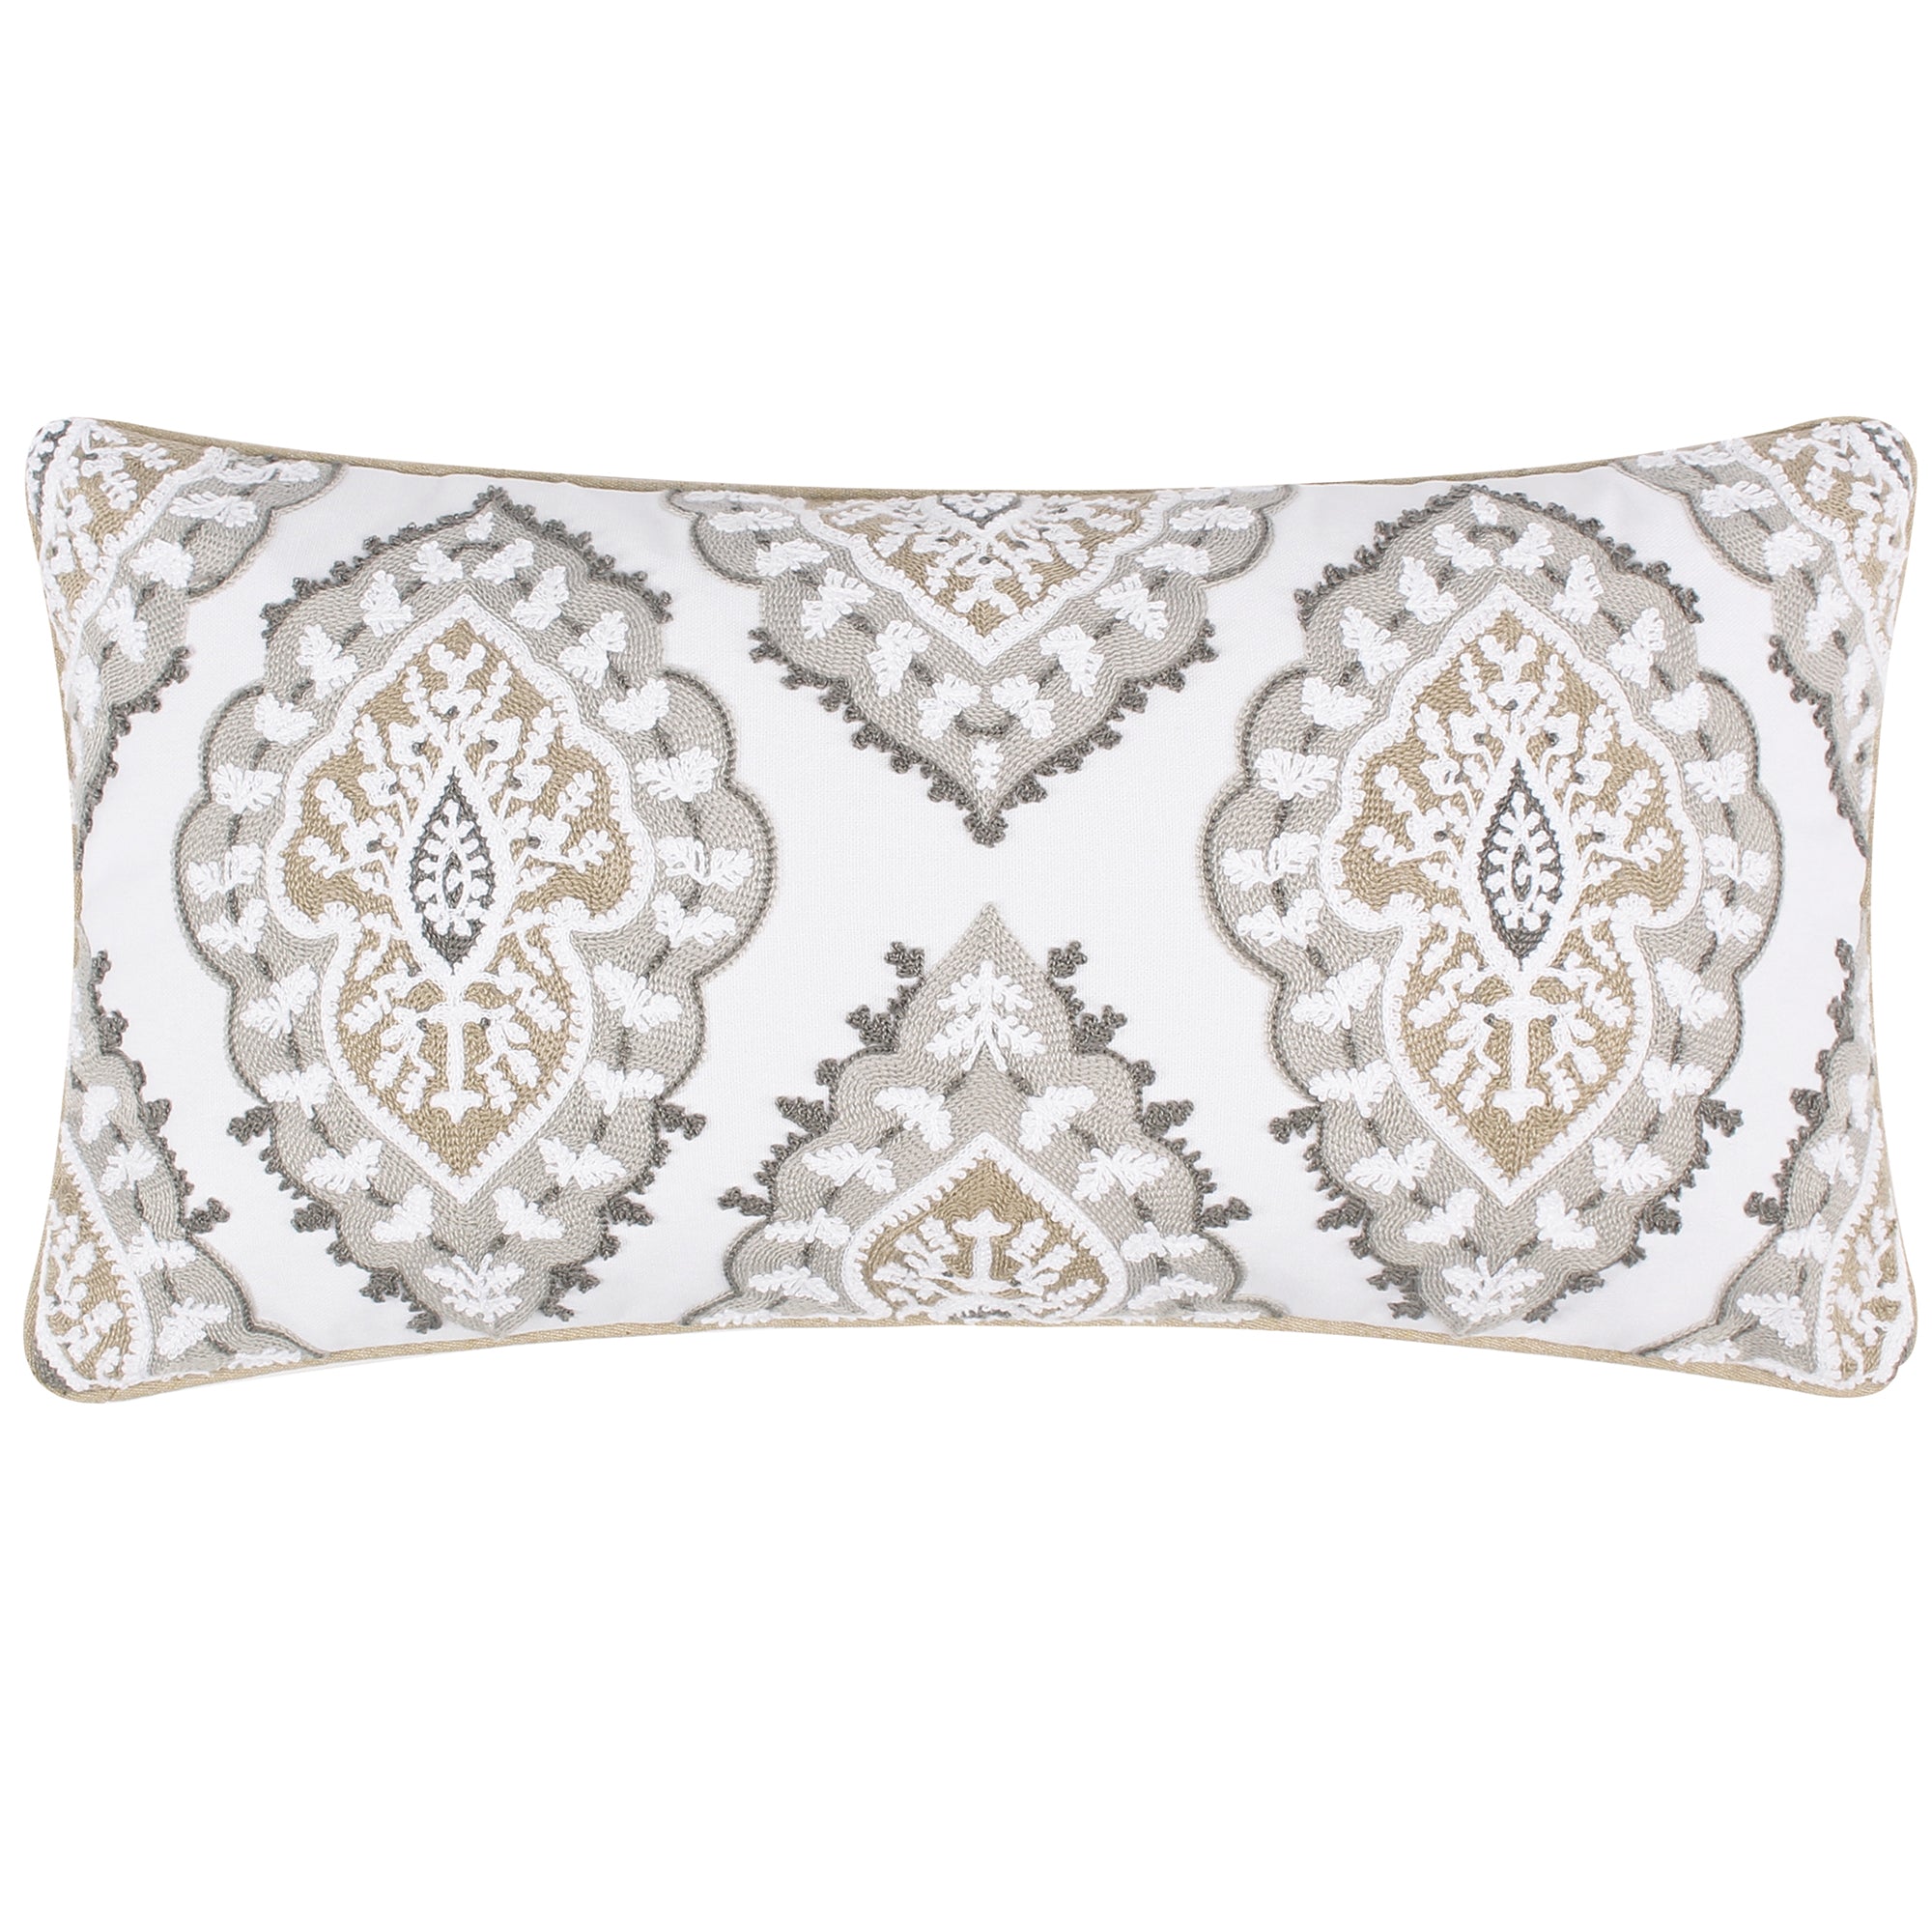 Pisa Embroidered Pillow